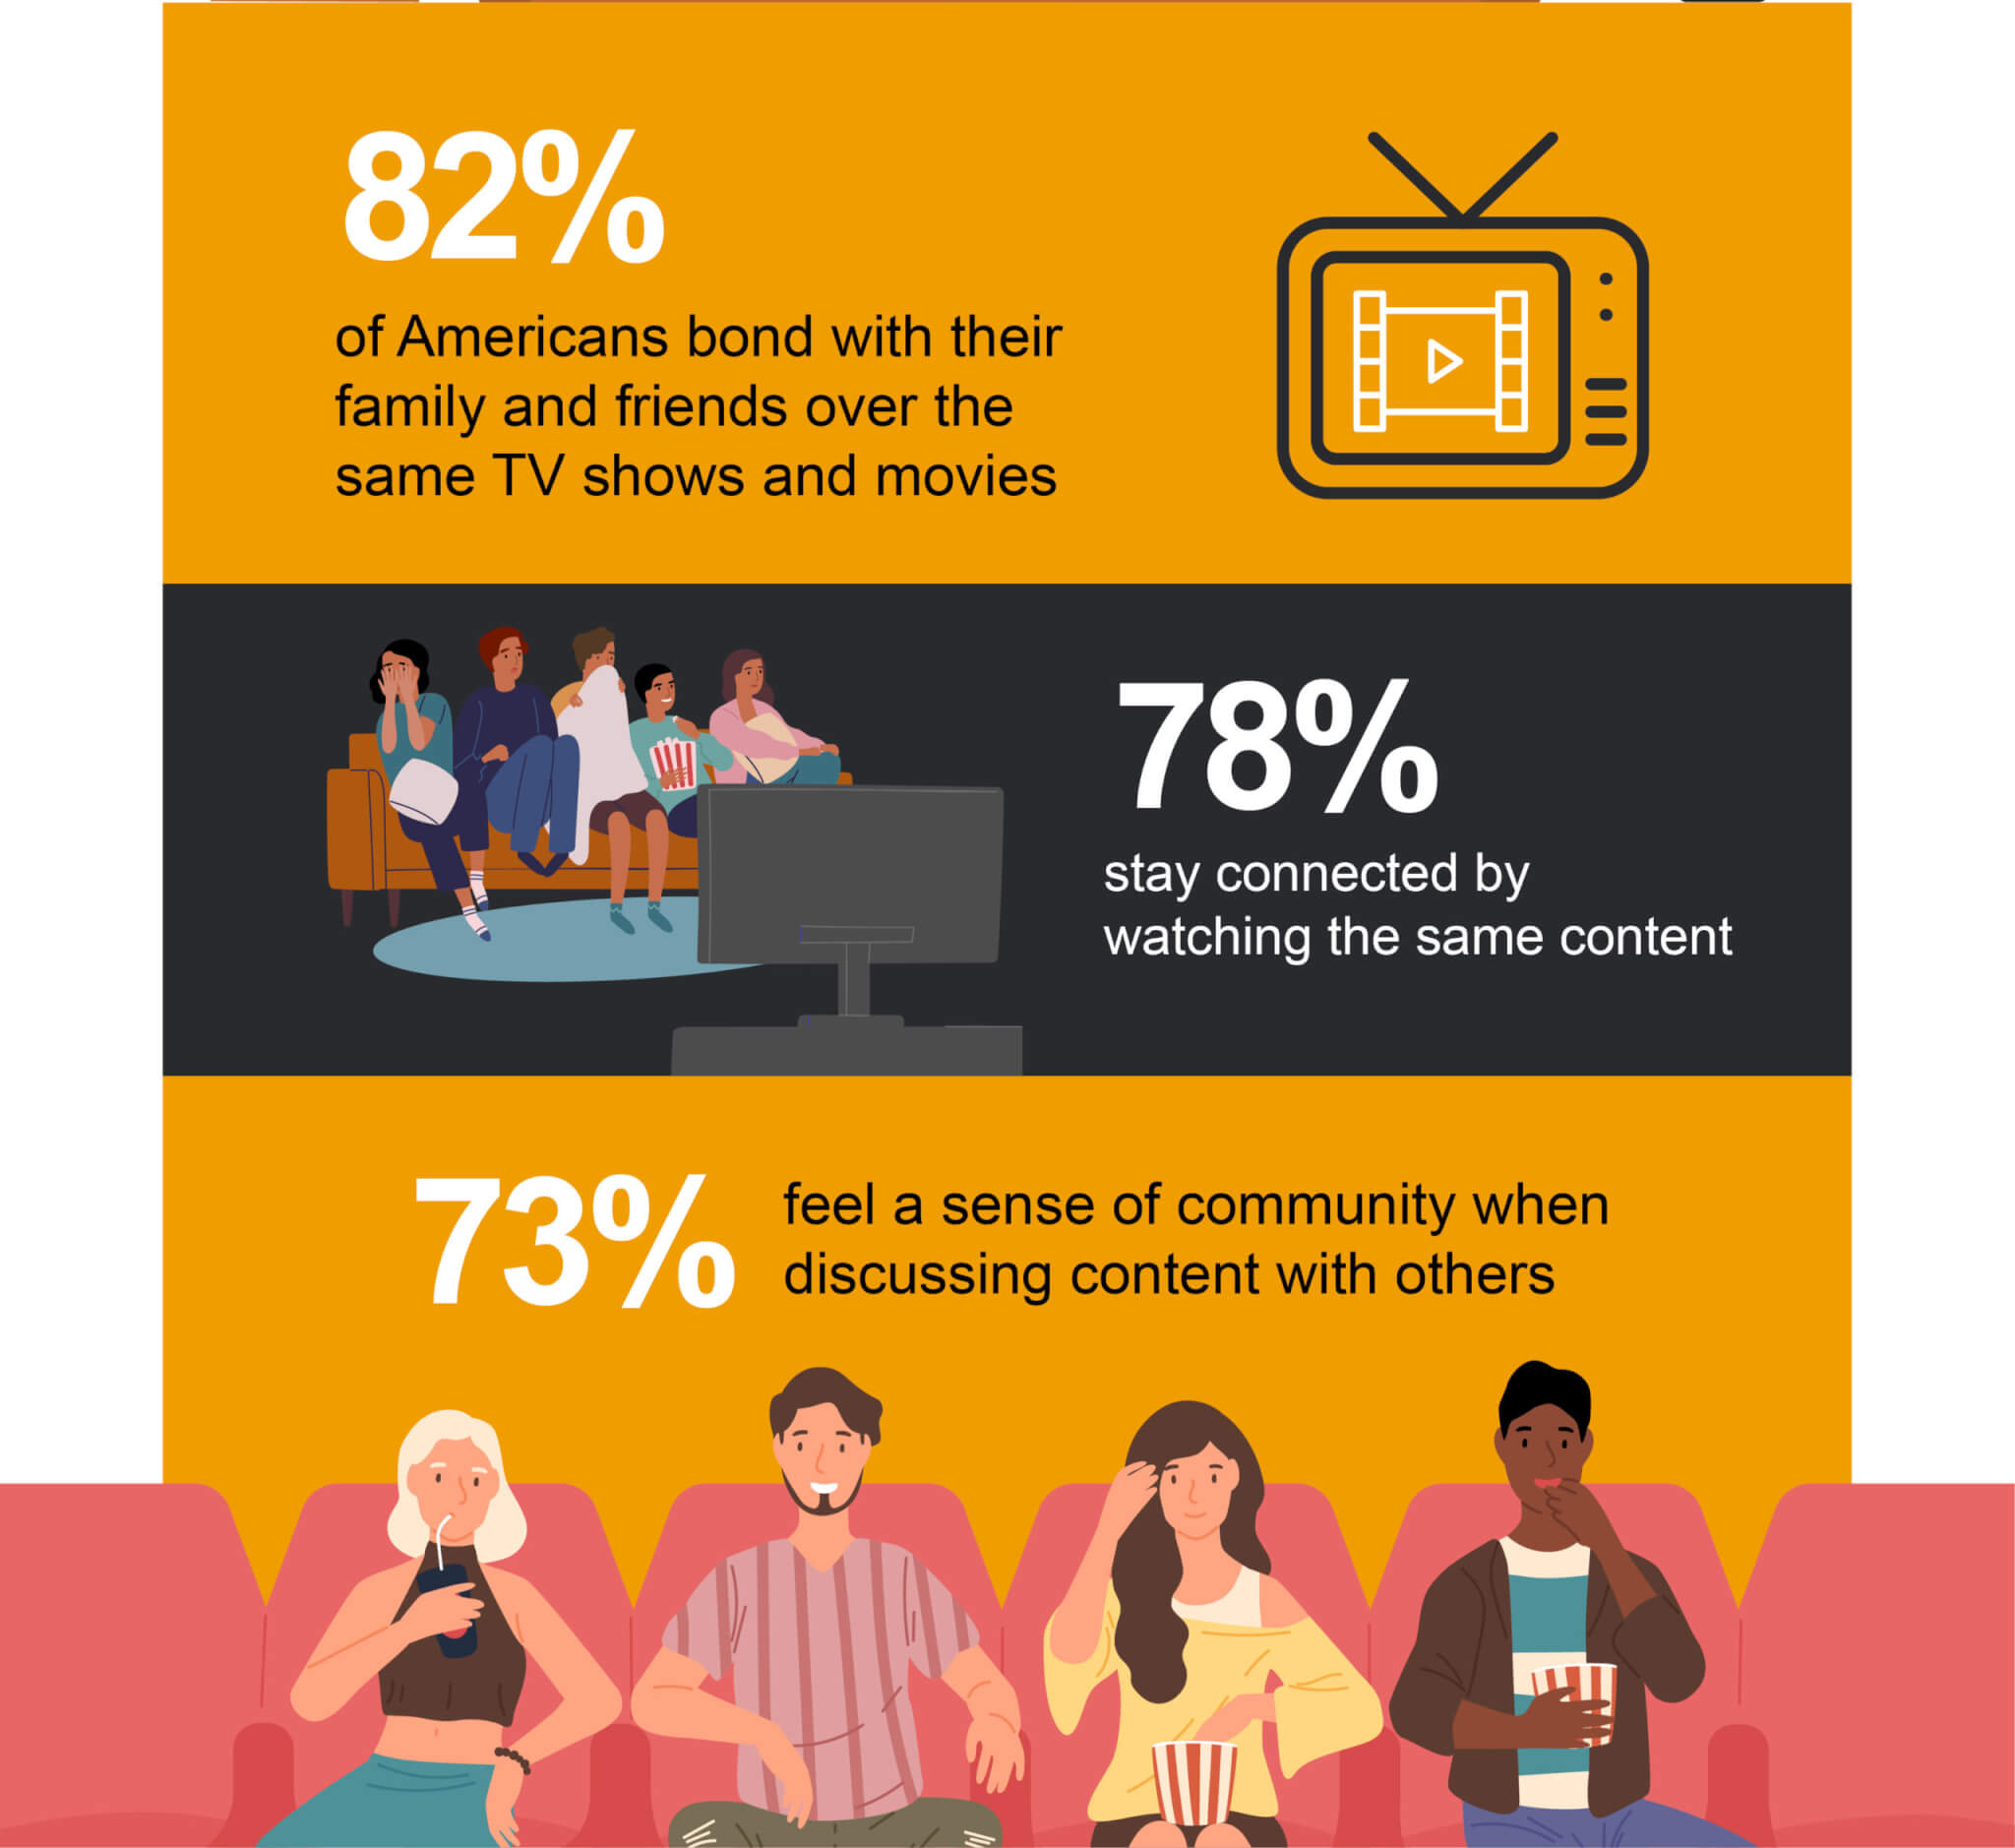 Infographic about bonding over TV and movies